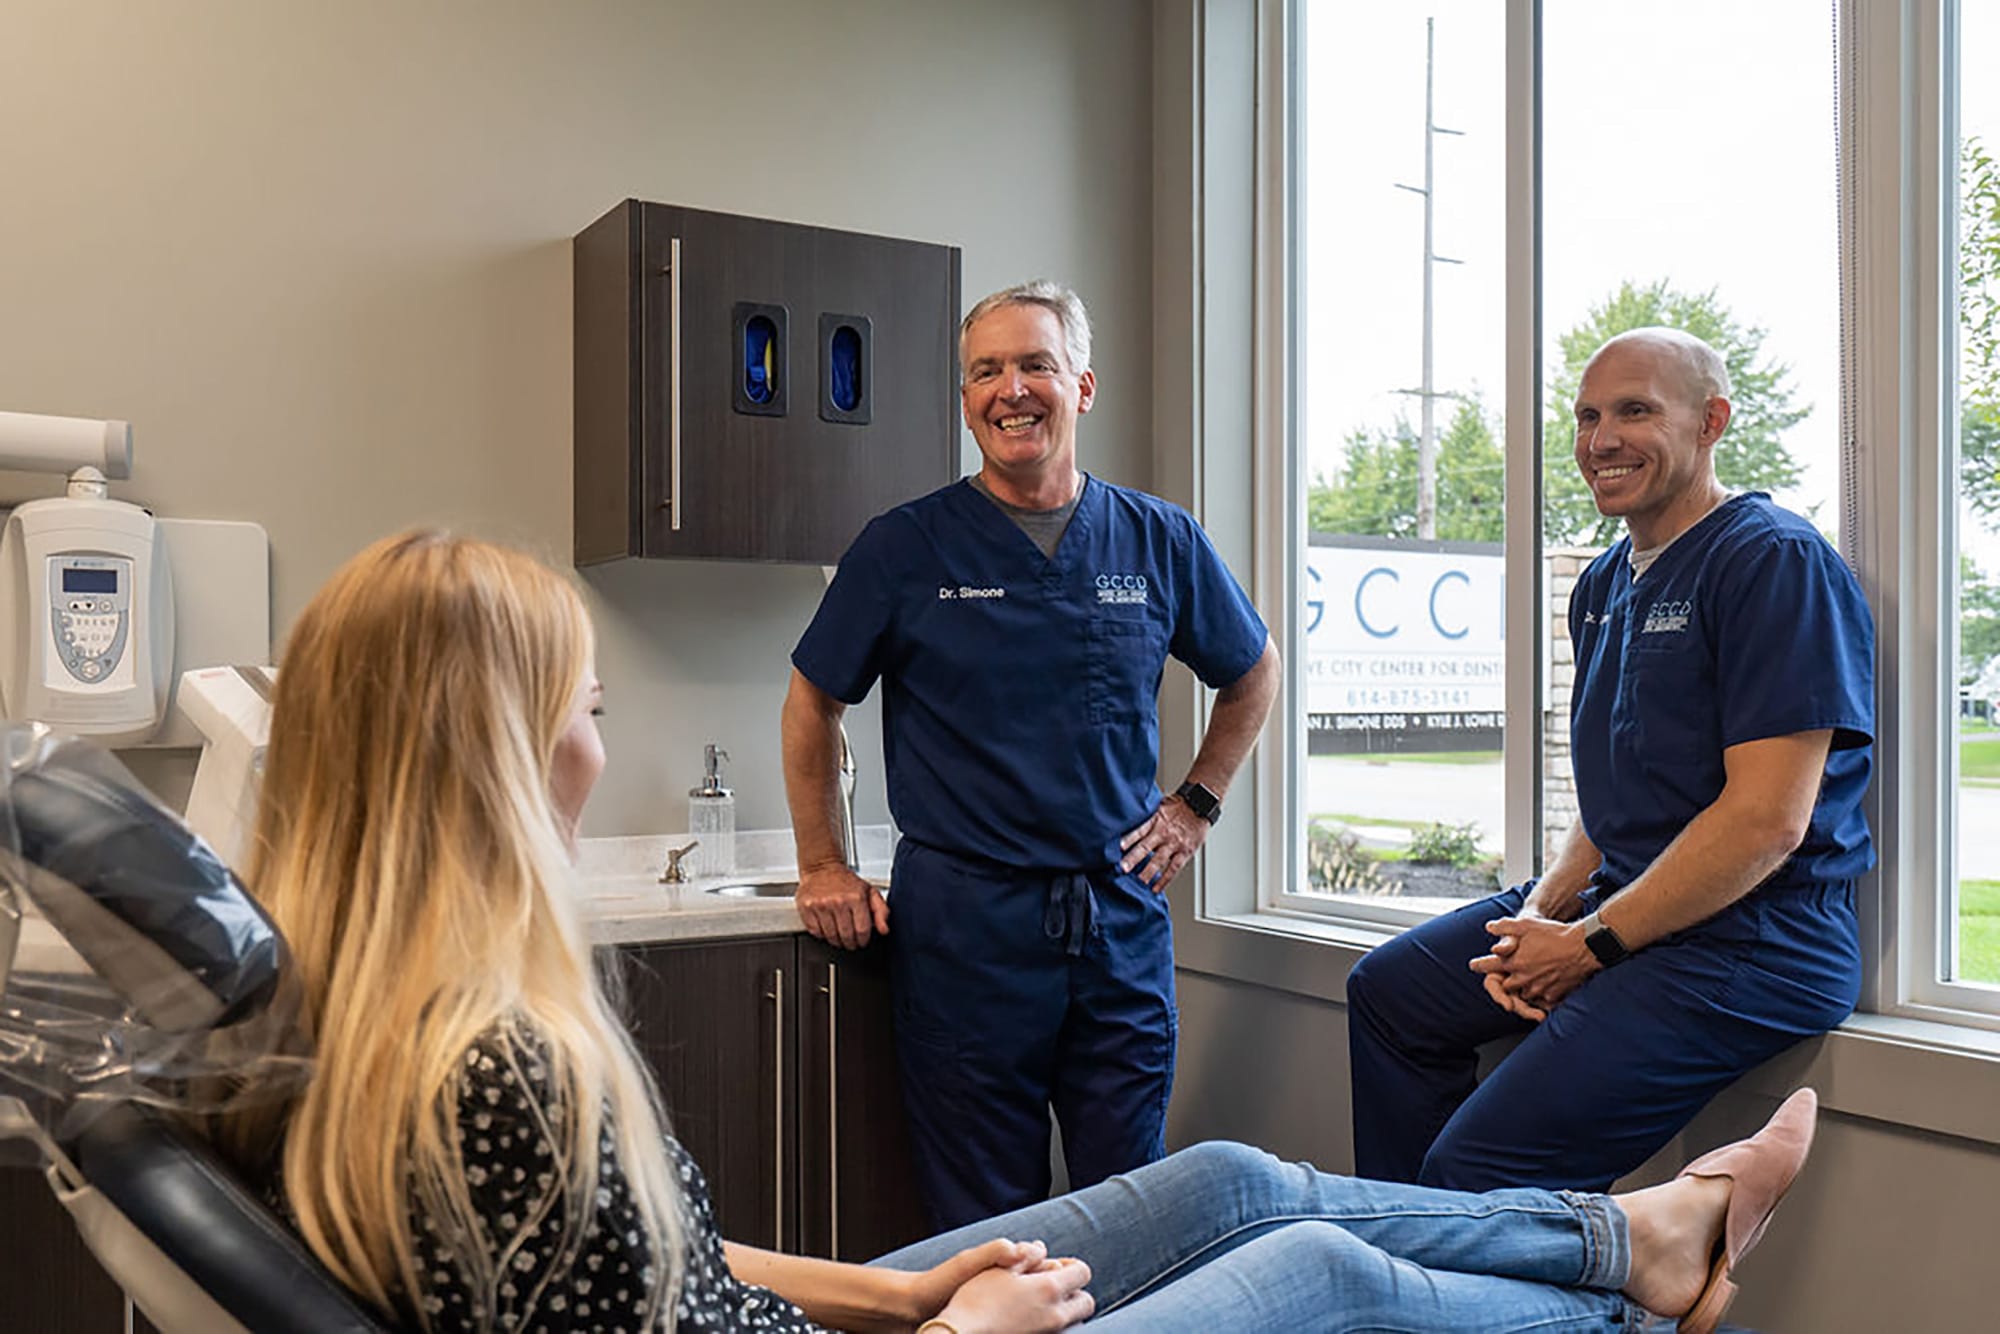 Grove City Center for Dentistry Kyle Lowe DDS and Bryan Simone DDS and patient